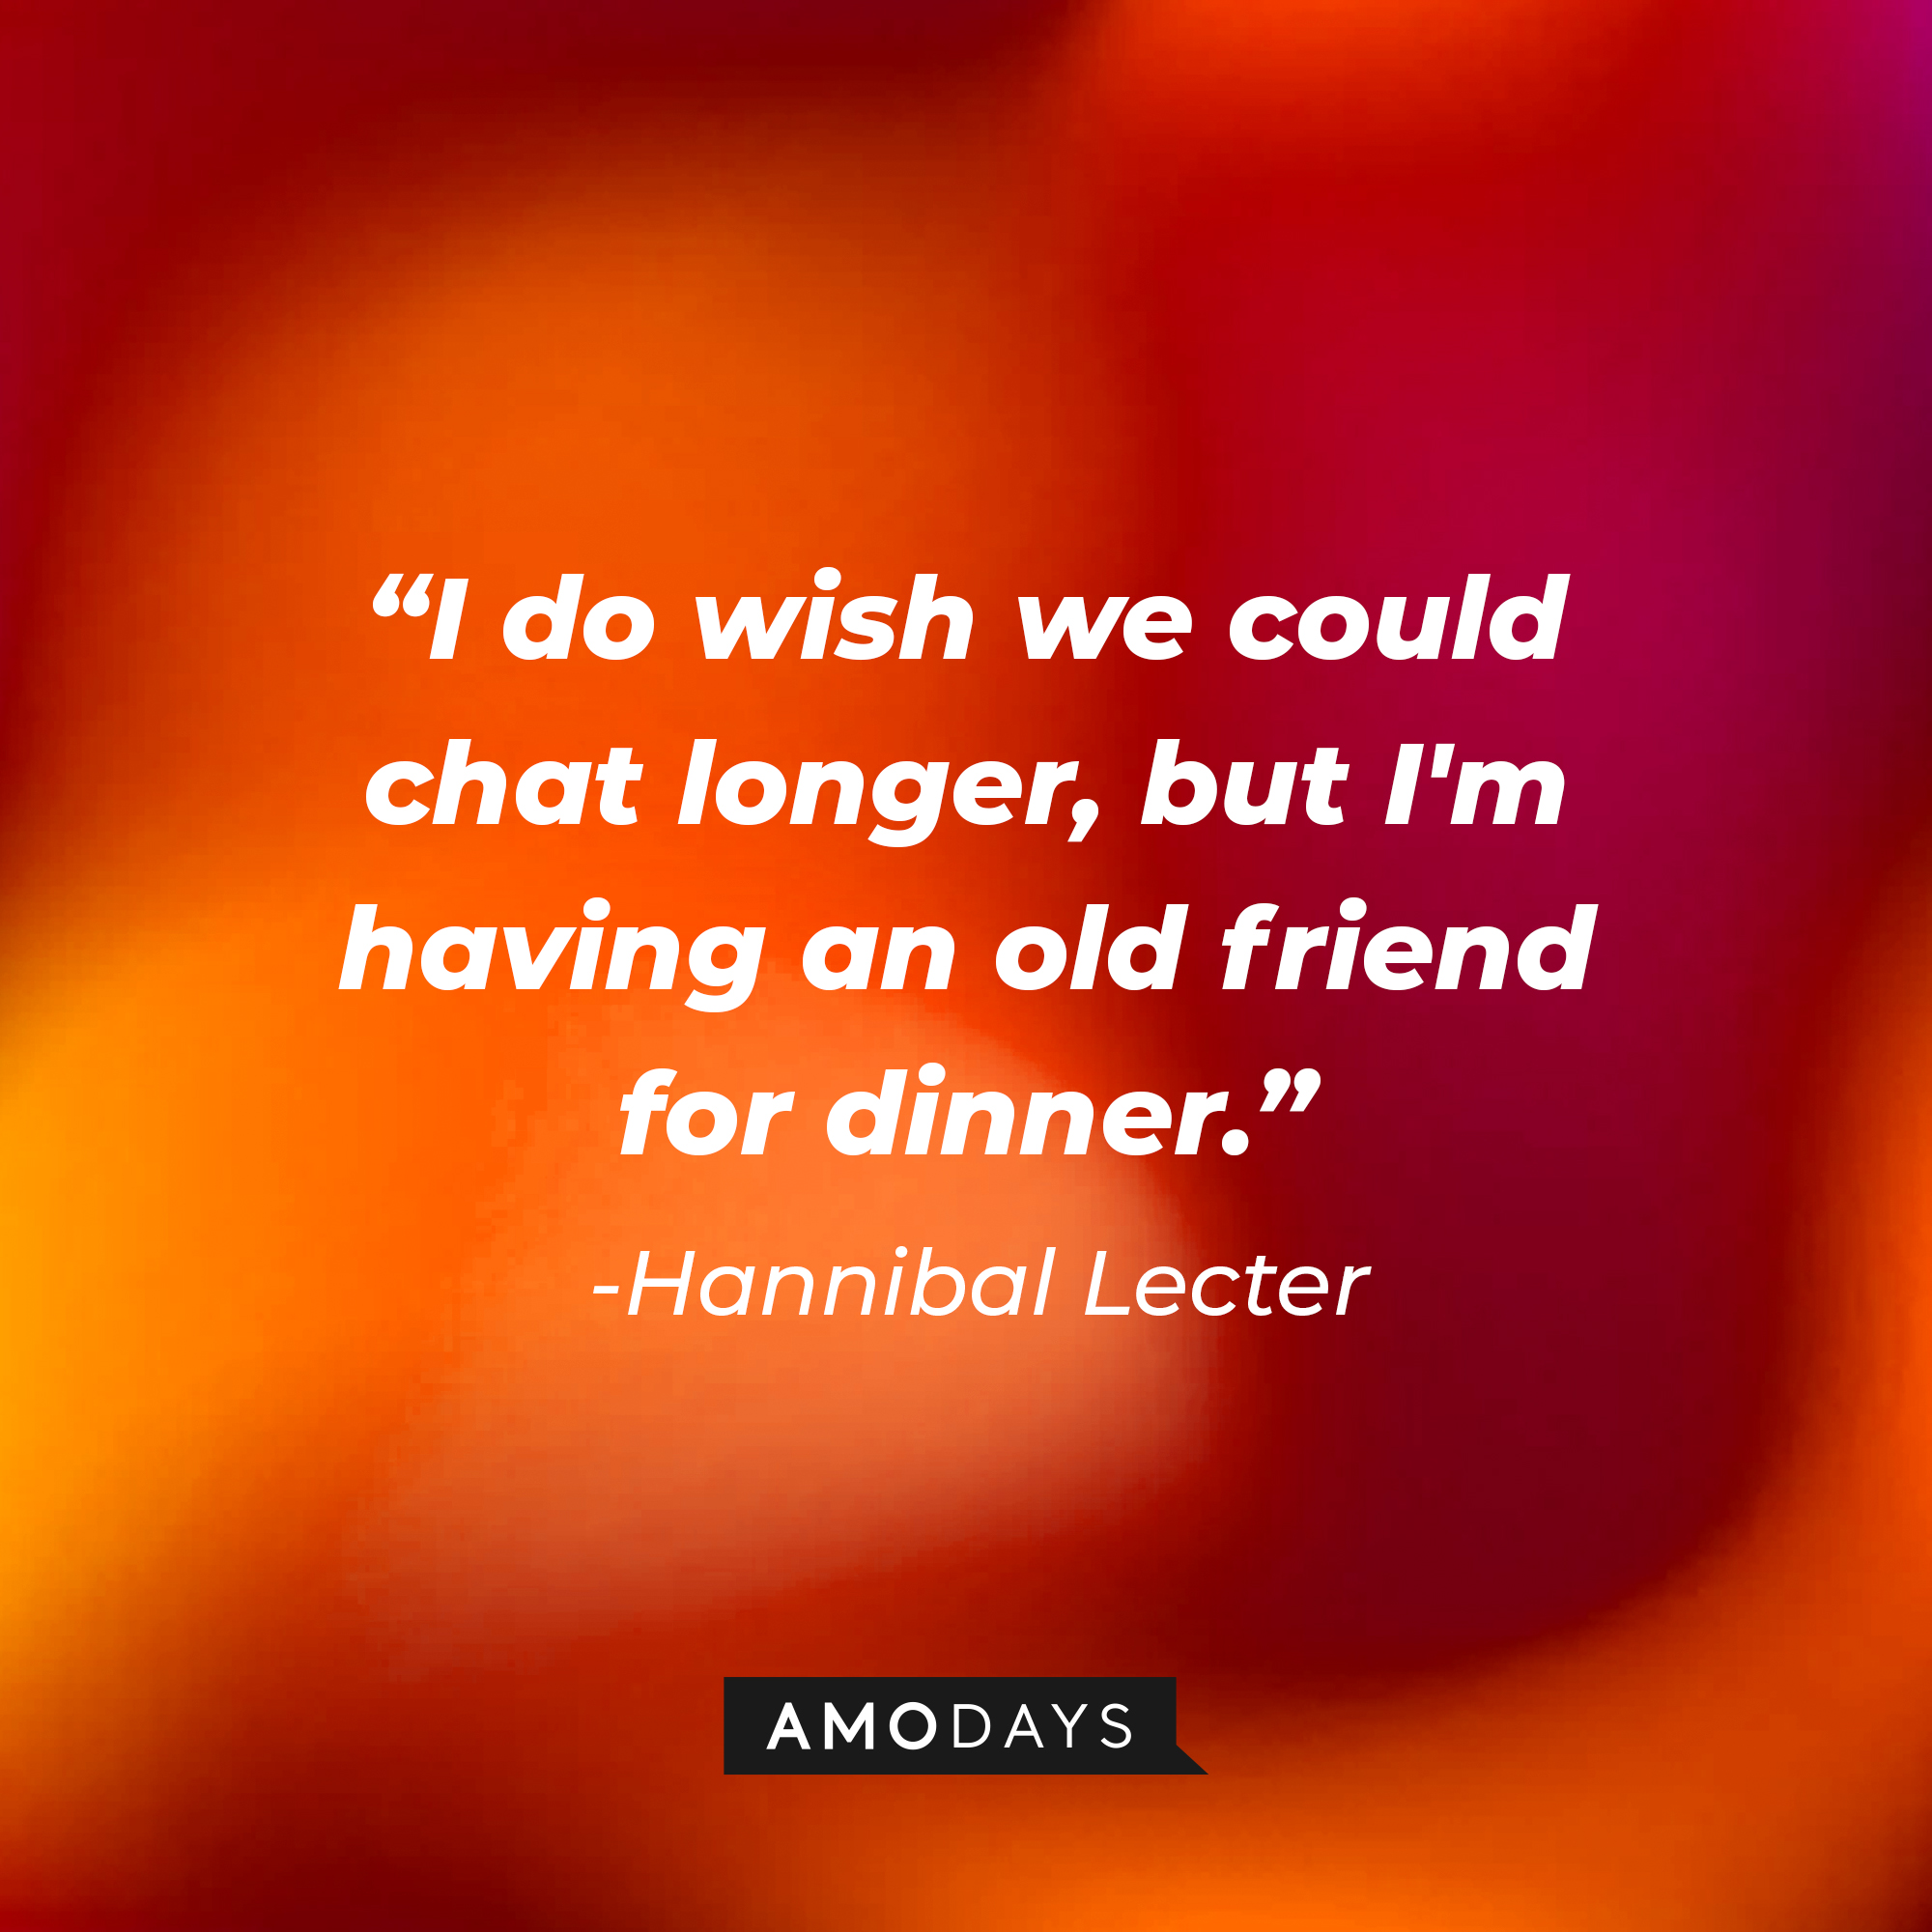 Hannibal Lecter's quote from "The Silence of the Lambs:" "I do wish we could chat longer, but I'm having an old friend for dinner." | Source: AmoDays